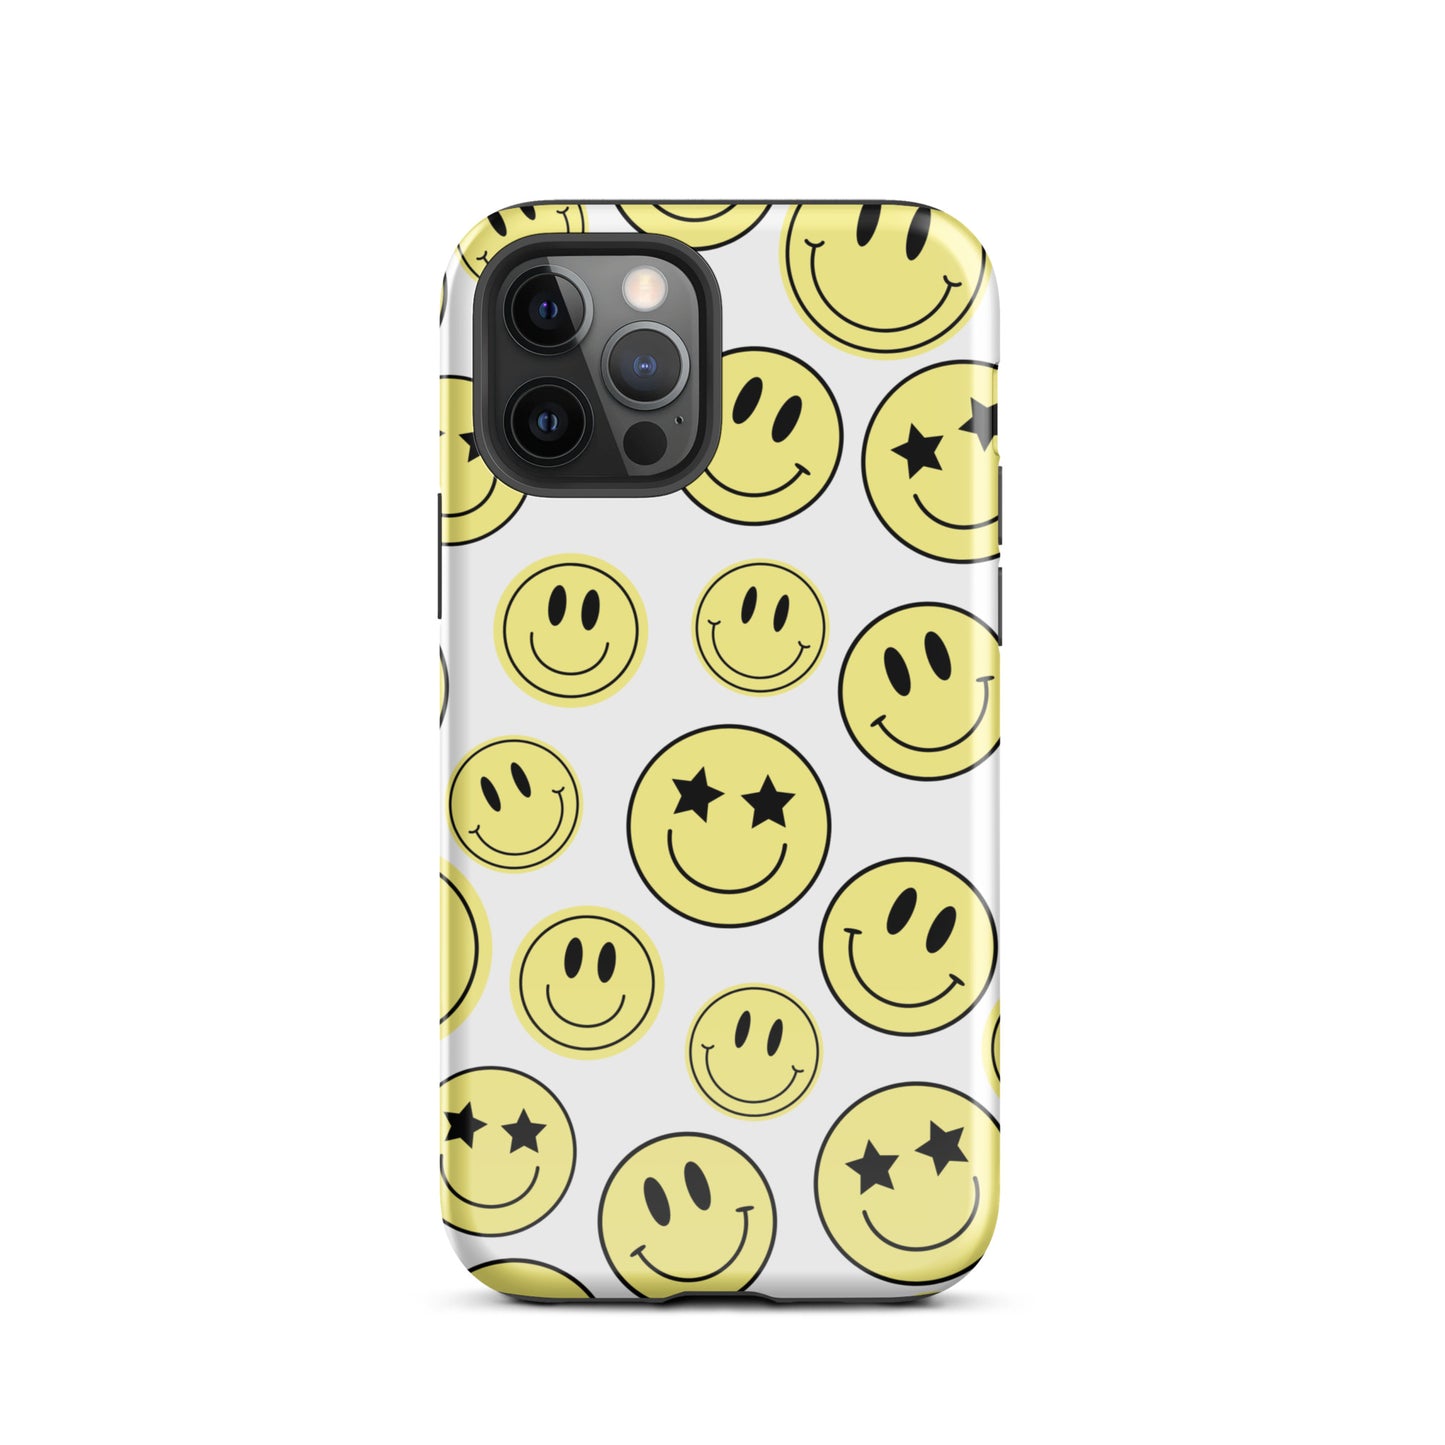 White Smiley Faces iPhone Case